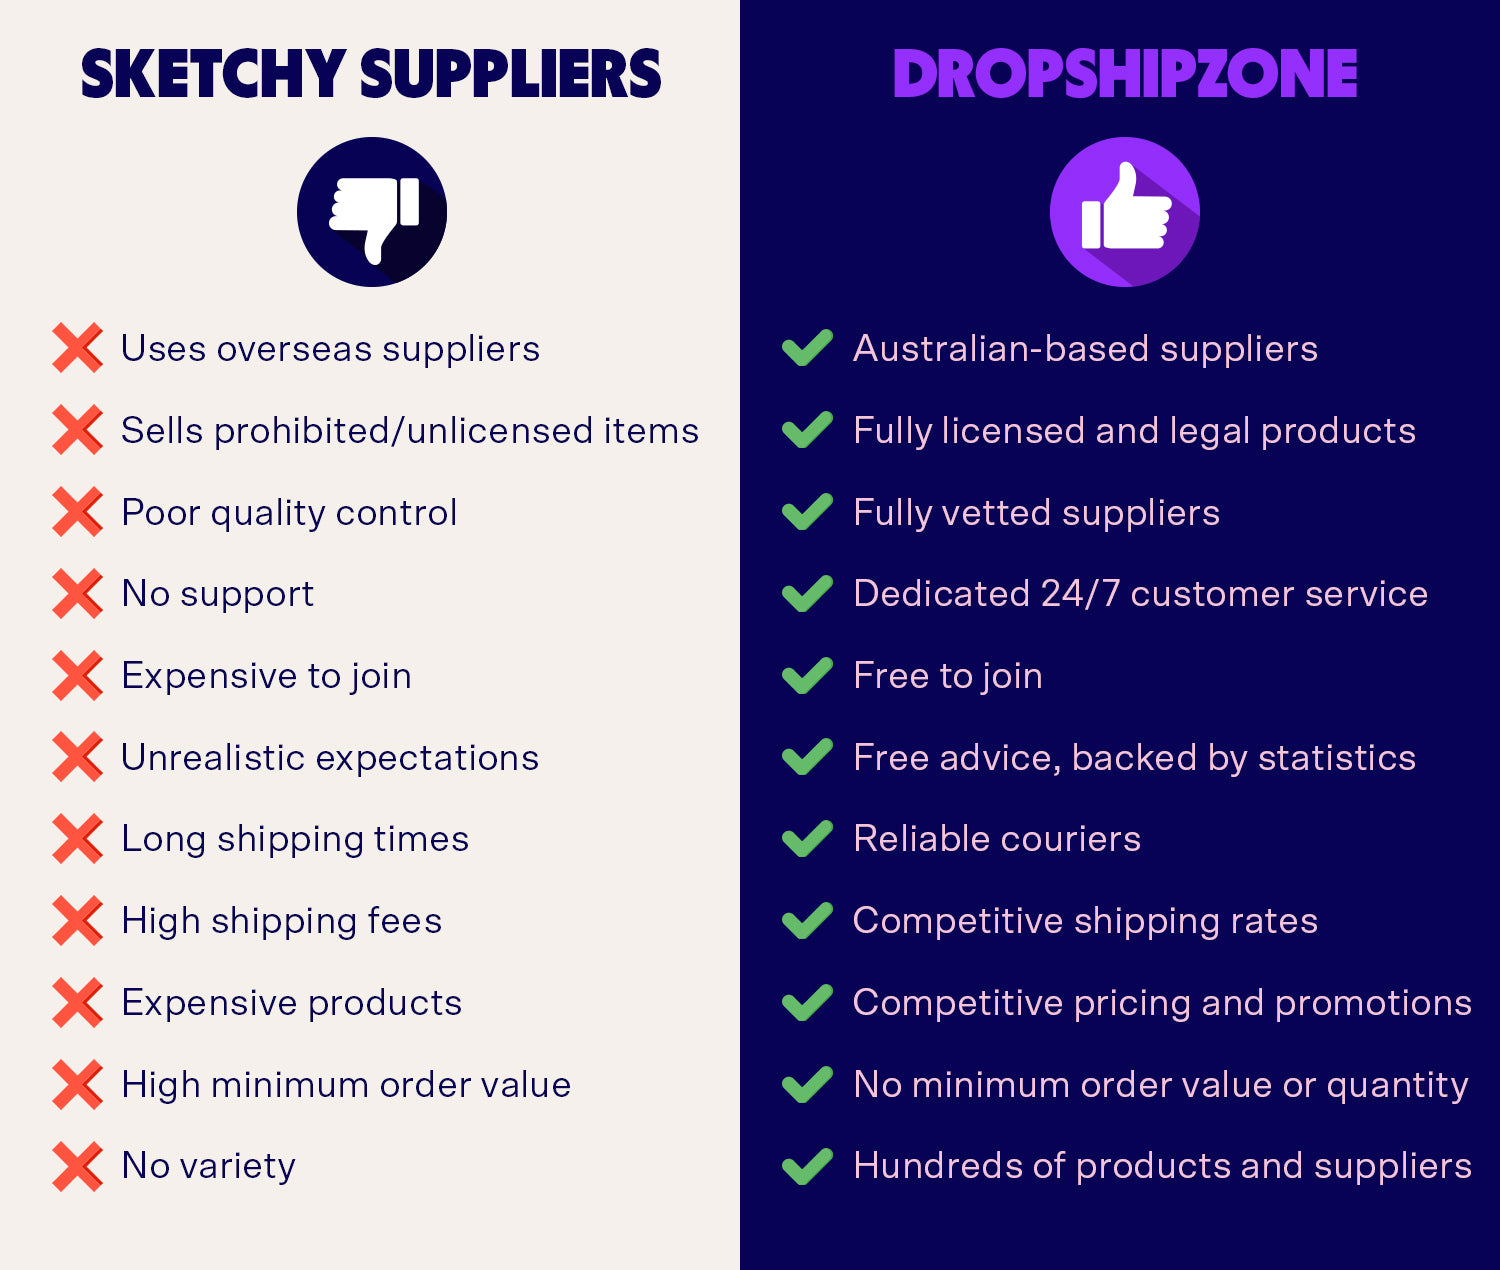 Choosing a reputable supplier is crucial to the success of your eBay store and Dropshipzone makes it simple.